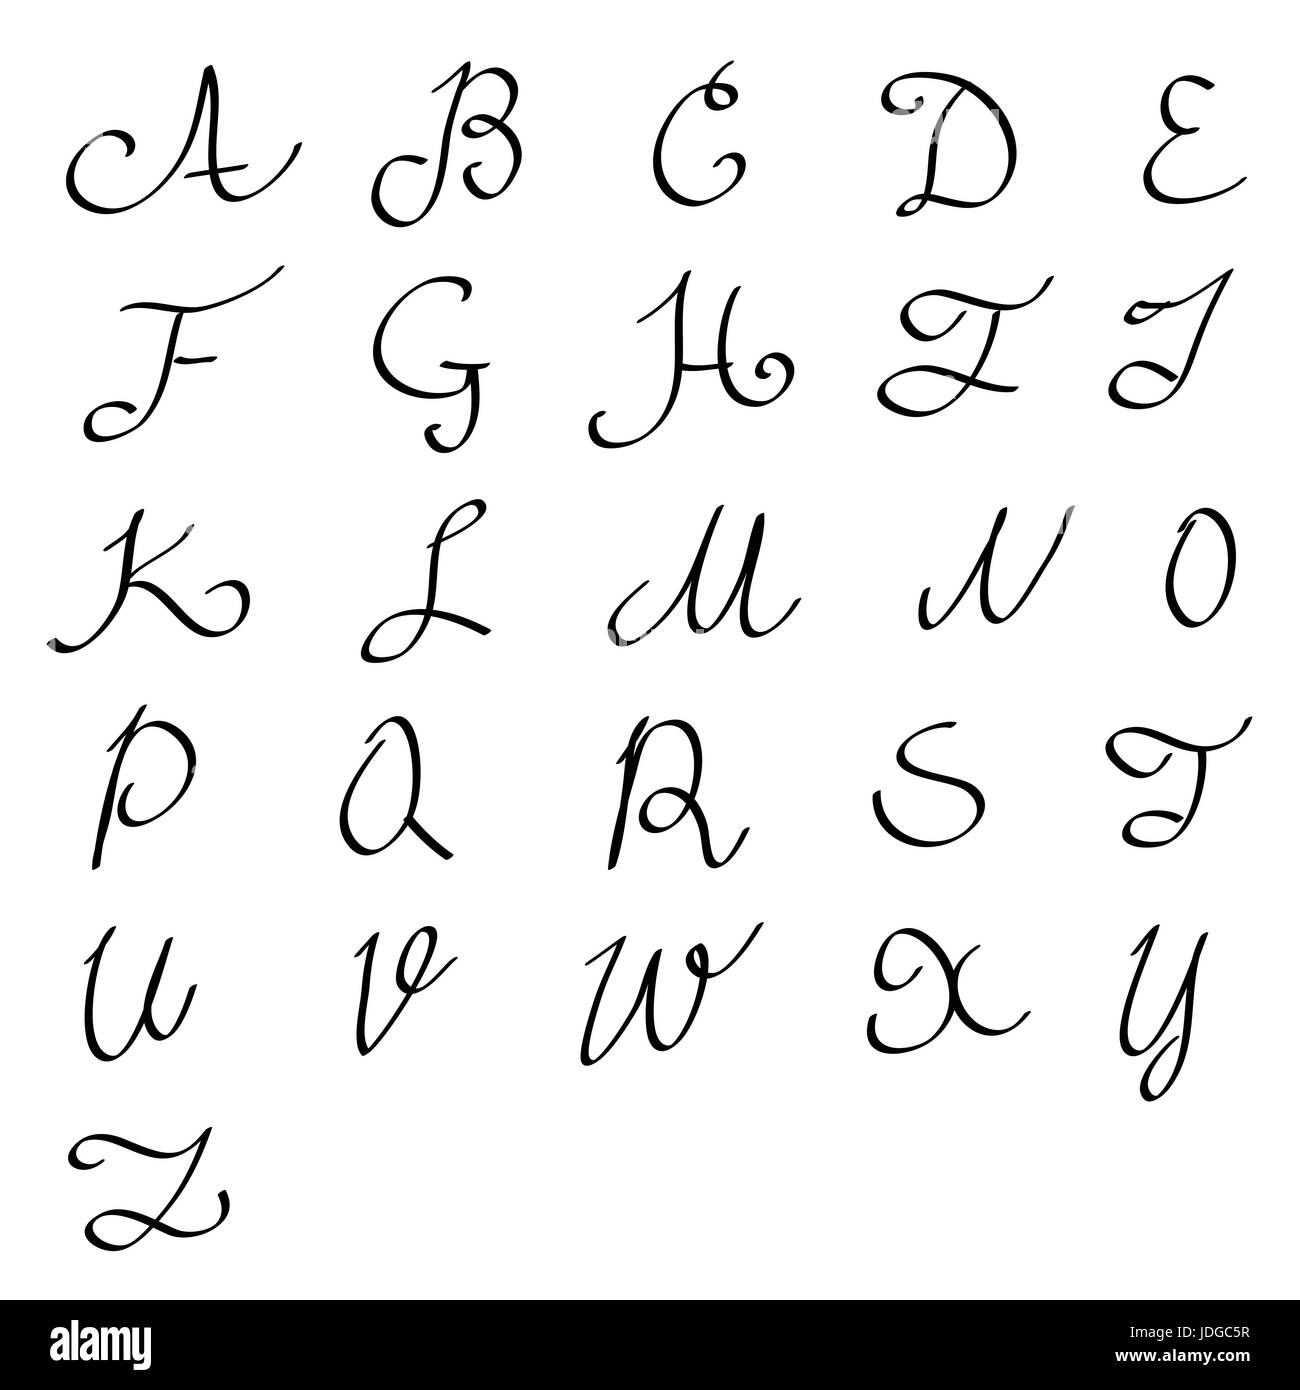 english letter alphabet in hand writing Stock Photo - Alamy